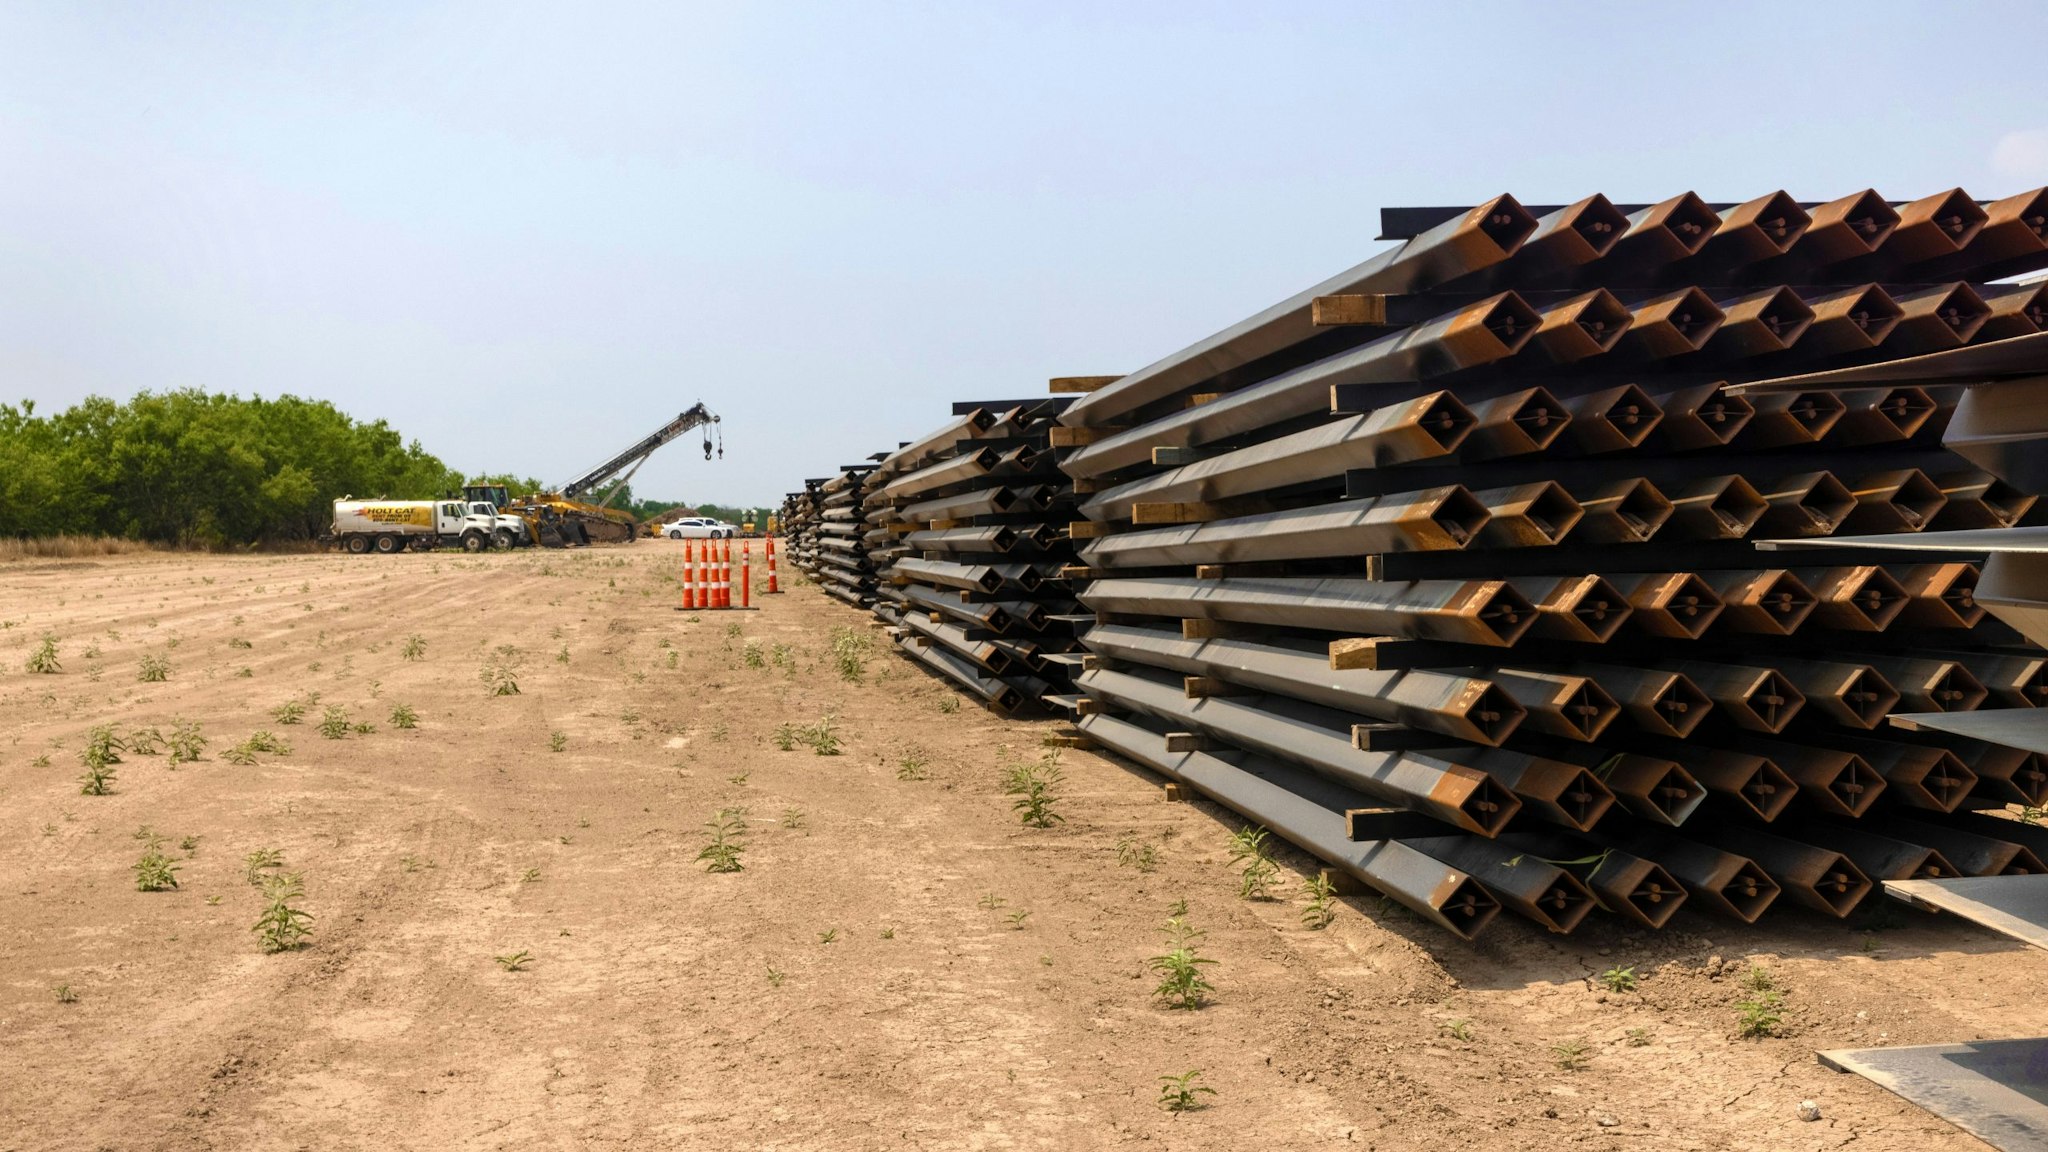 LA JOYA, TEXAS - APRIL 14: Unused pieces of steel bollard-style wall lay near a portion of unfinished border wall at the U.S.-Mexico border on April 14, 2021 in La Joya, Texas. President Joe Biden paused wall construction by executive order upon taking office in January, 2021. The administration has reportedly decided to possibly finish wall construction on gaps where the wall was largely completed.